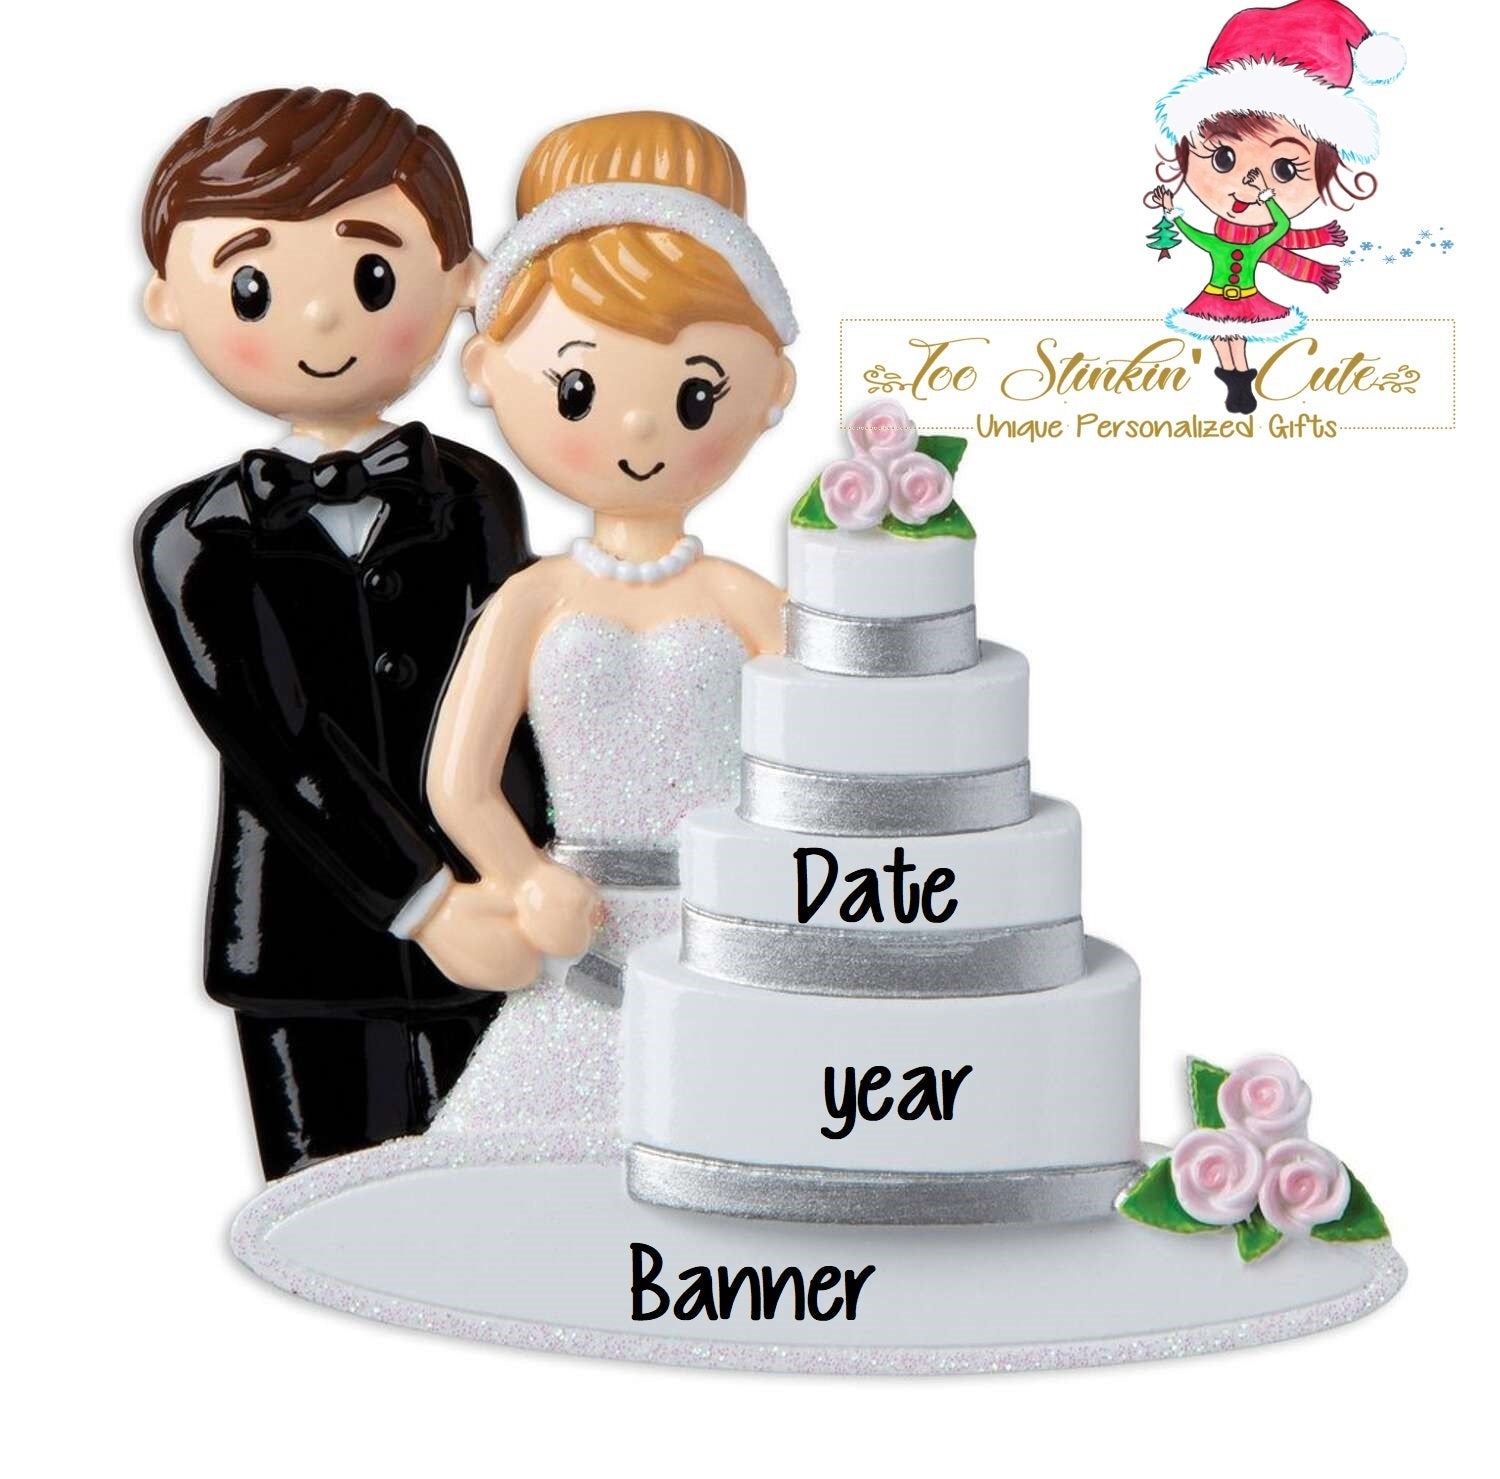 Personalized Christmas Ornament Wedding Cake + Free Shipping! (Marriage Wedding Couple Engaged Just Married)